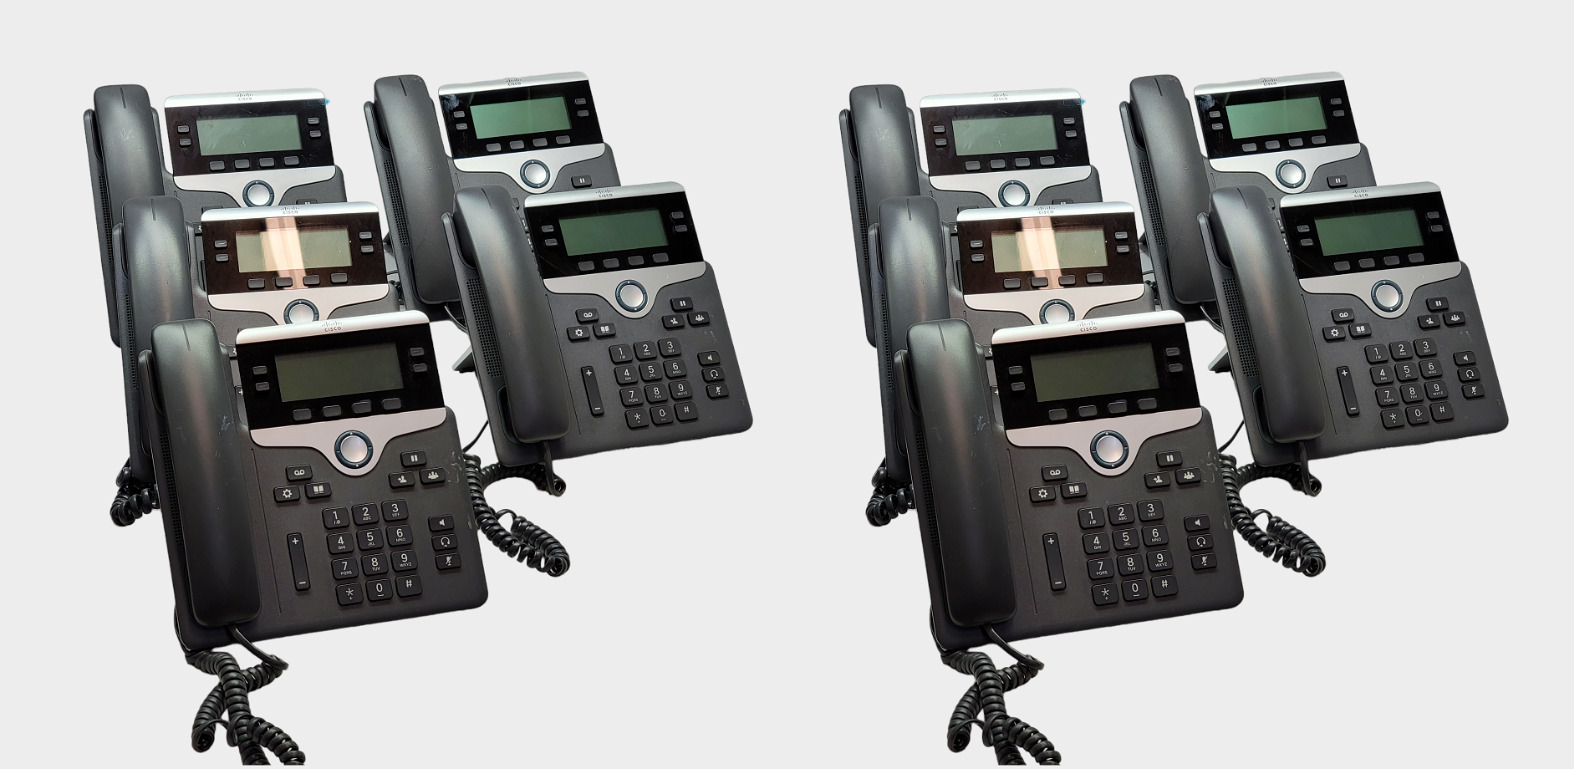 Cisco 7841 CP-7841-K9 VoIP Phone With Stand 4 Line Display Phone Lot of 10